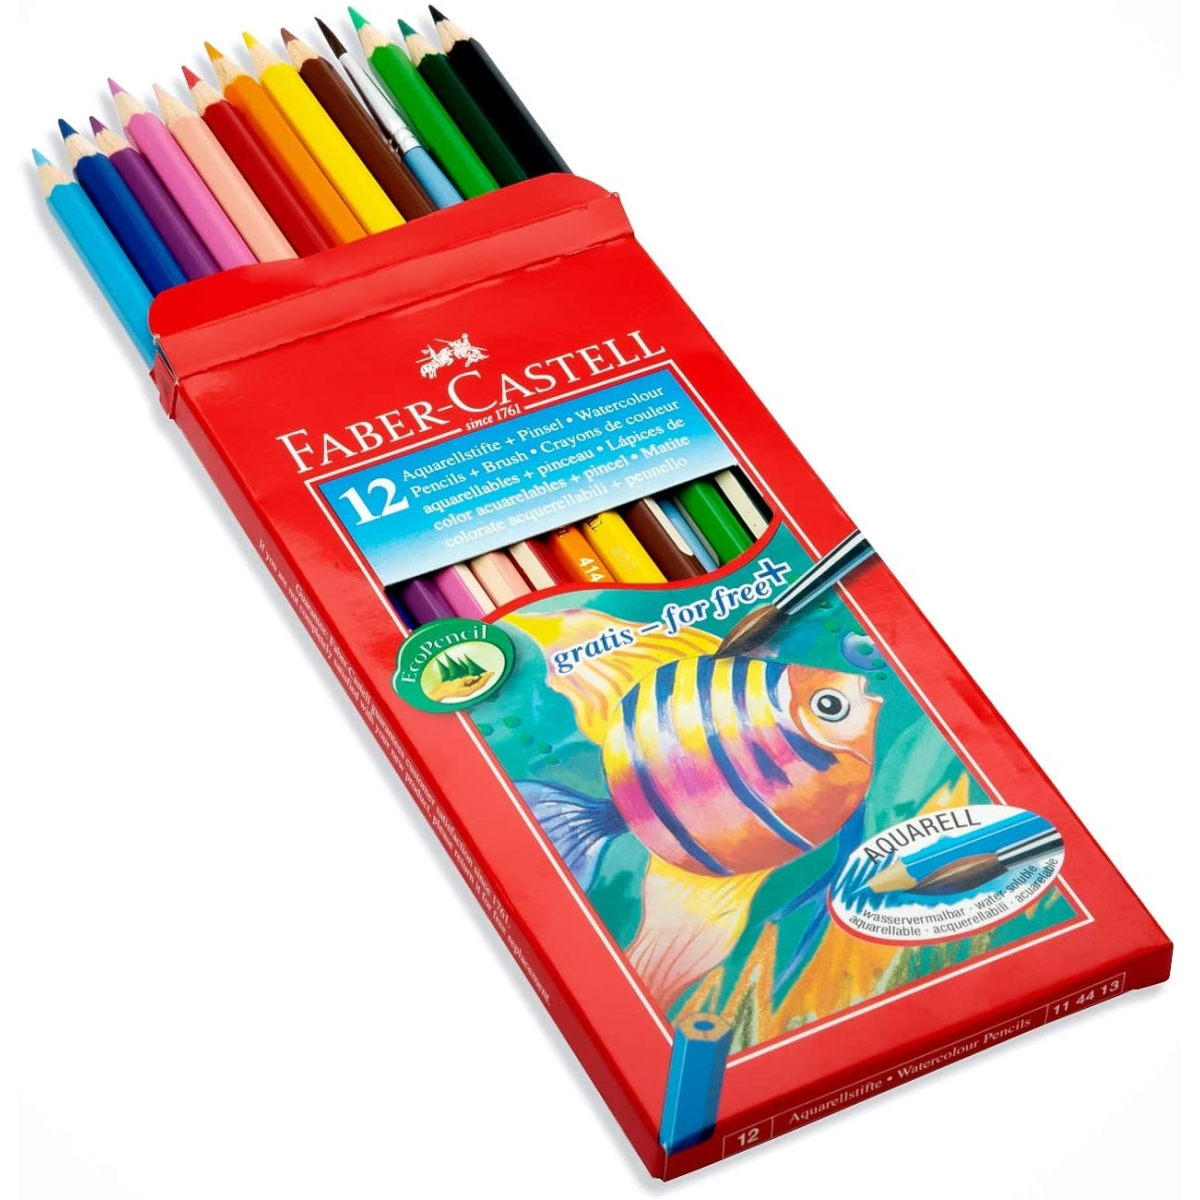 Taille-crayon gomme cylindrique Faber Castell - Aquarelle Plus